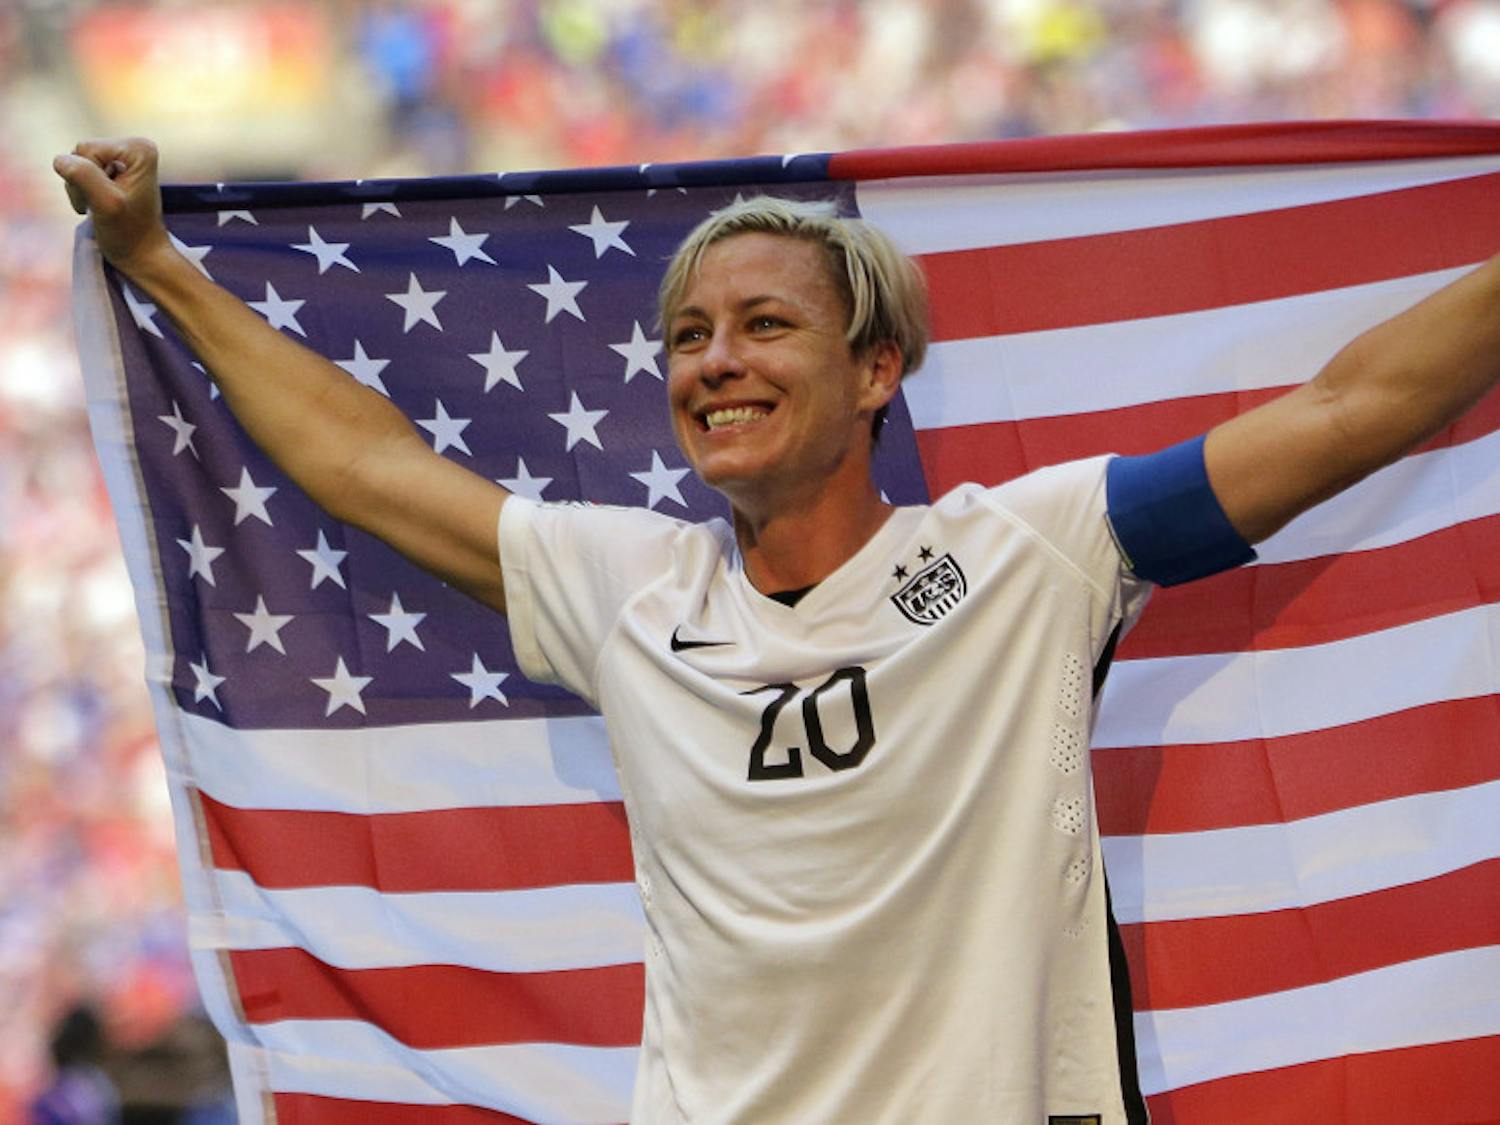 In this July 5, 2015, file photo, United States' Abby Wambach holds an American flag after the U.S. beat Japan 5-2 in the FIFA Women's World Cup soccer championship in Vancouver, British Columbia, Canada. Wambach, the leading career scorer, male or female, in international soccer, announced her retirement from soccer on Tuesday, Oct. 27, 2015, shortly after the U.S. national team celebrated its Women's World Cup victory at the White House. (AP Photo/Elaine Thompson, File_